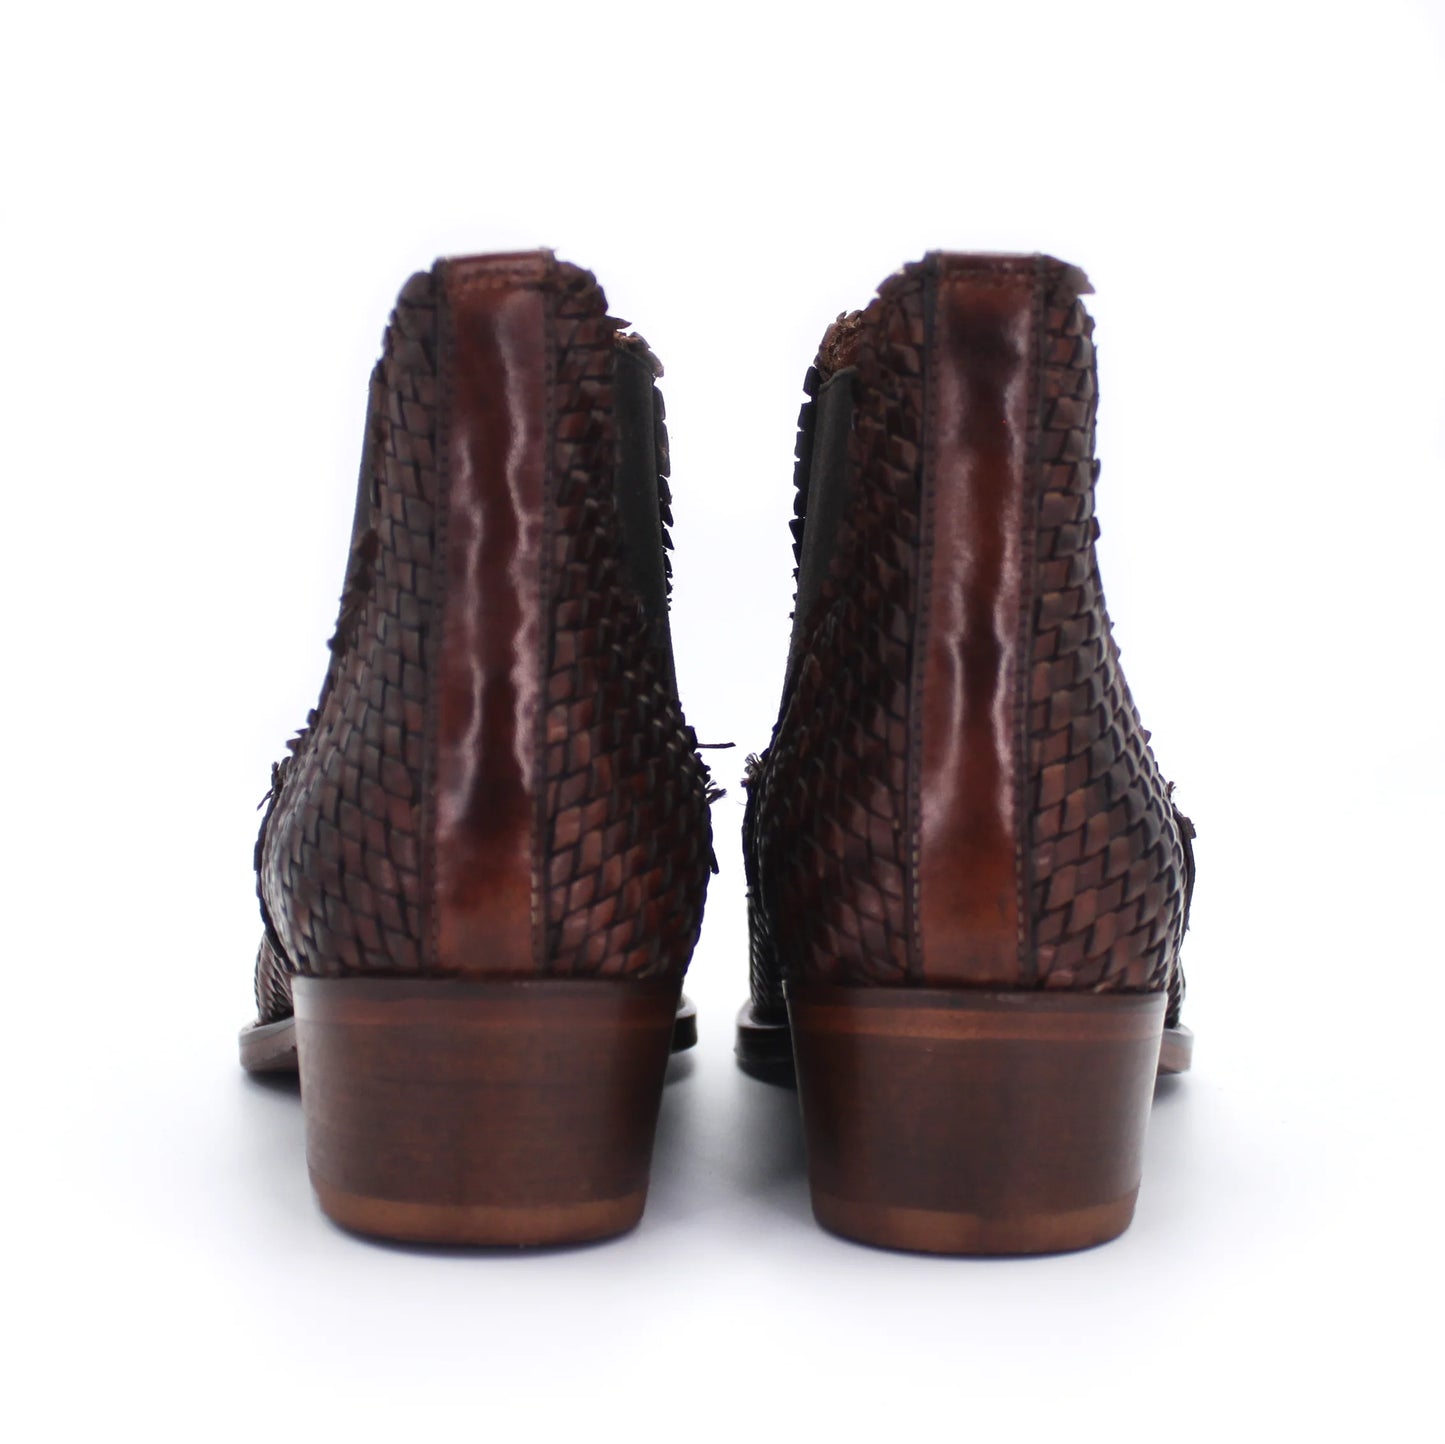 Shop Handmade Italian Leather Woven Boot in Brown (9410) or browse our range of hand-made Italian boots for women in leather or suede in-store at Aliverti Durban or Cape Town, or shop online. We deliver in South Africa & offer multiple payment plans as well as accept multiple safe & secure payment methods.